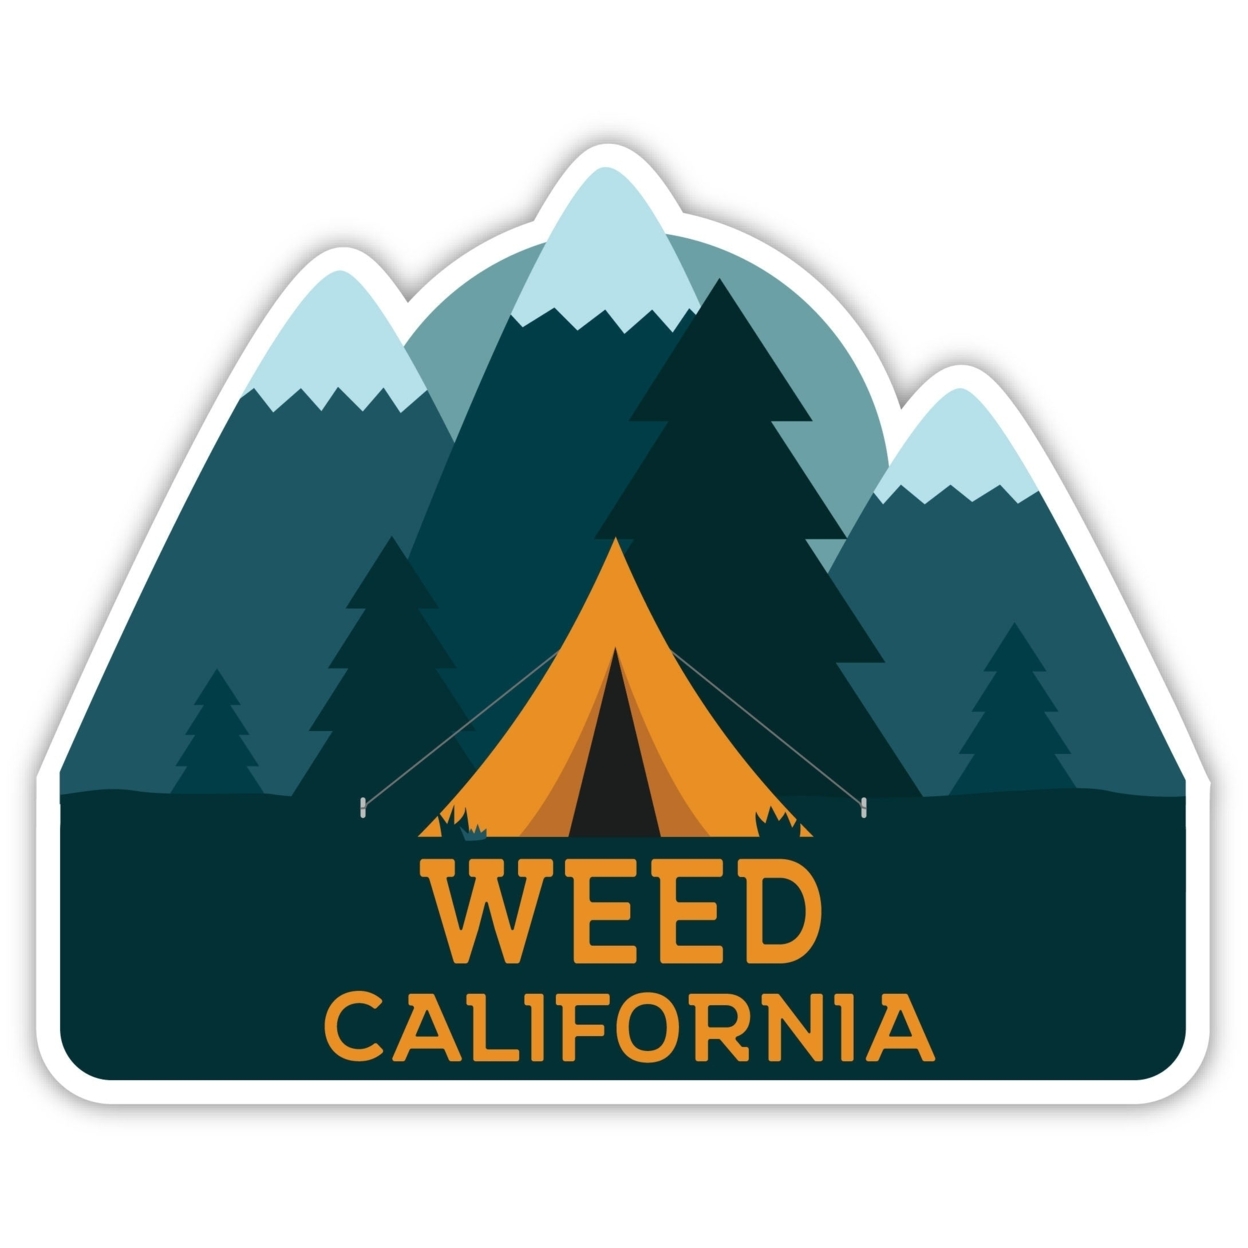 Weed California Souvenir Decorative Stickers (Choose Theme And Size) - Single Unit, 2-Inch, Tent